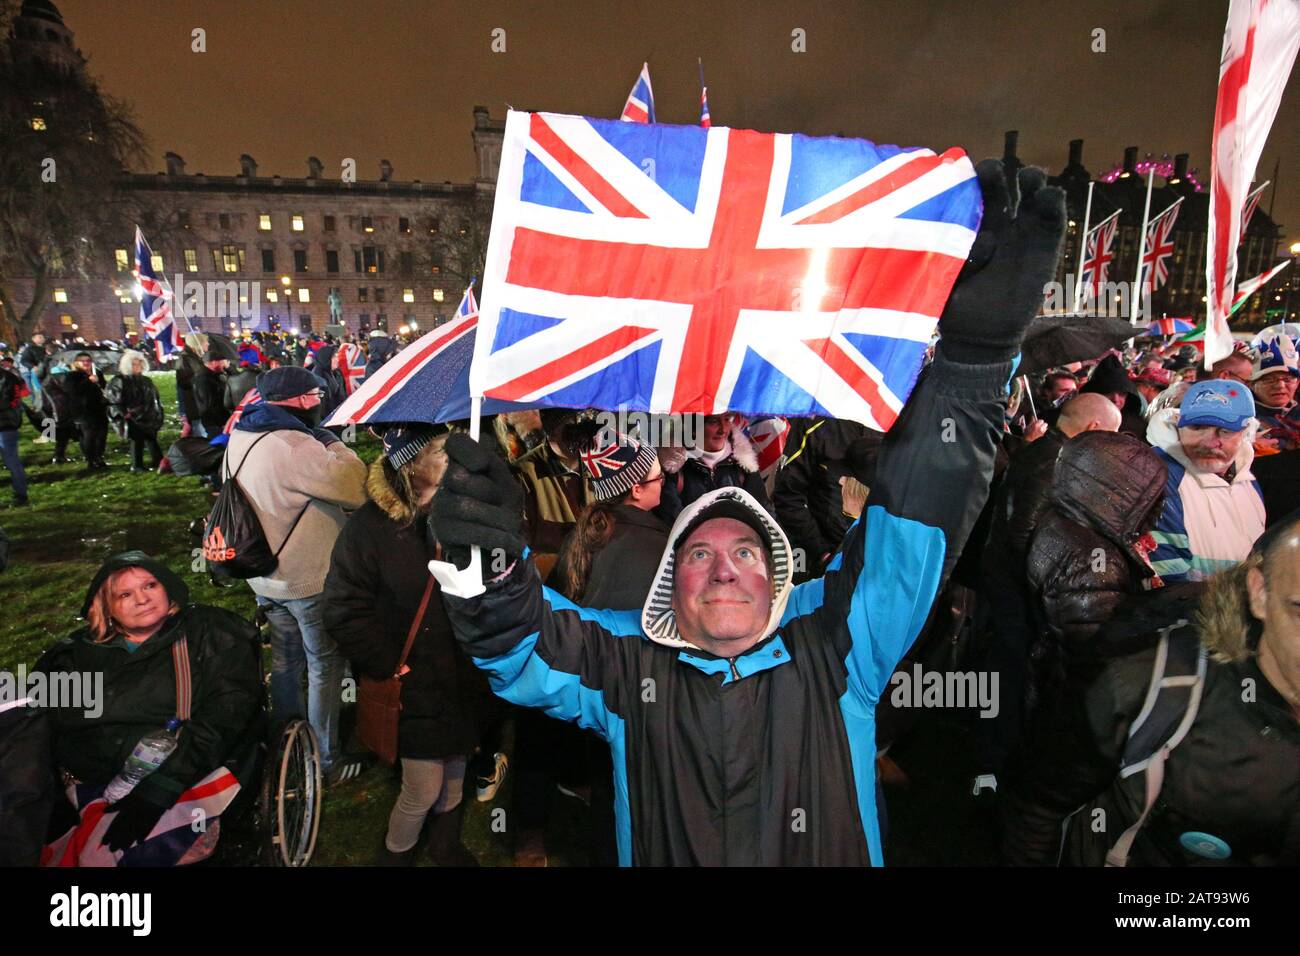 Pro-Brexit supporters in Parliament Square, London, ahead of the UK leaving the European Union at 11pm on Friday. Stock Photo